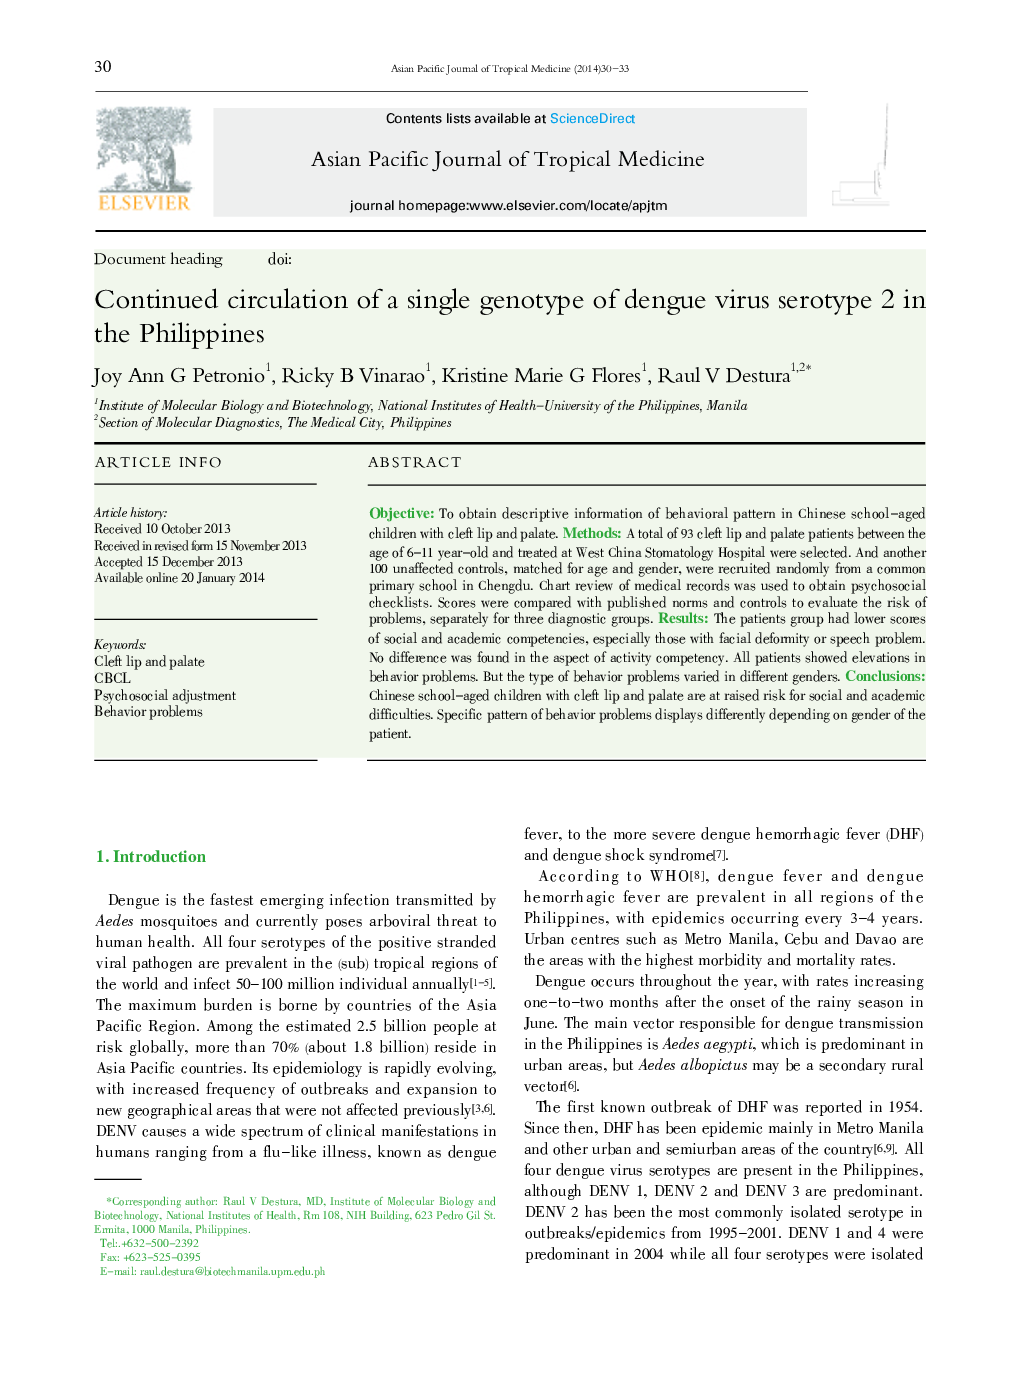 Continued circulation of a single genotype of dengue virus serotype 2 in the Philippines 